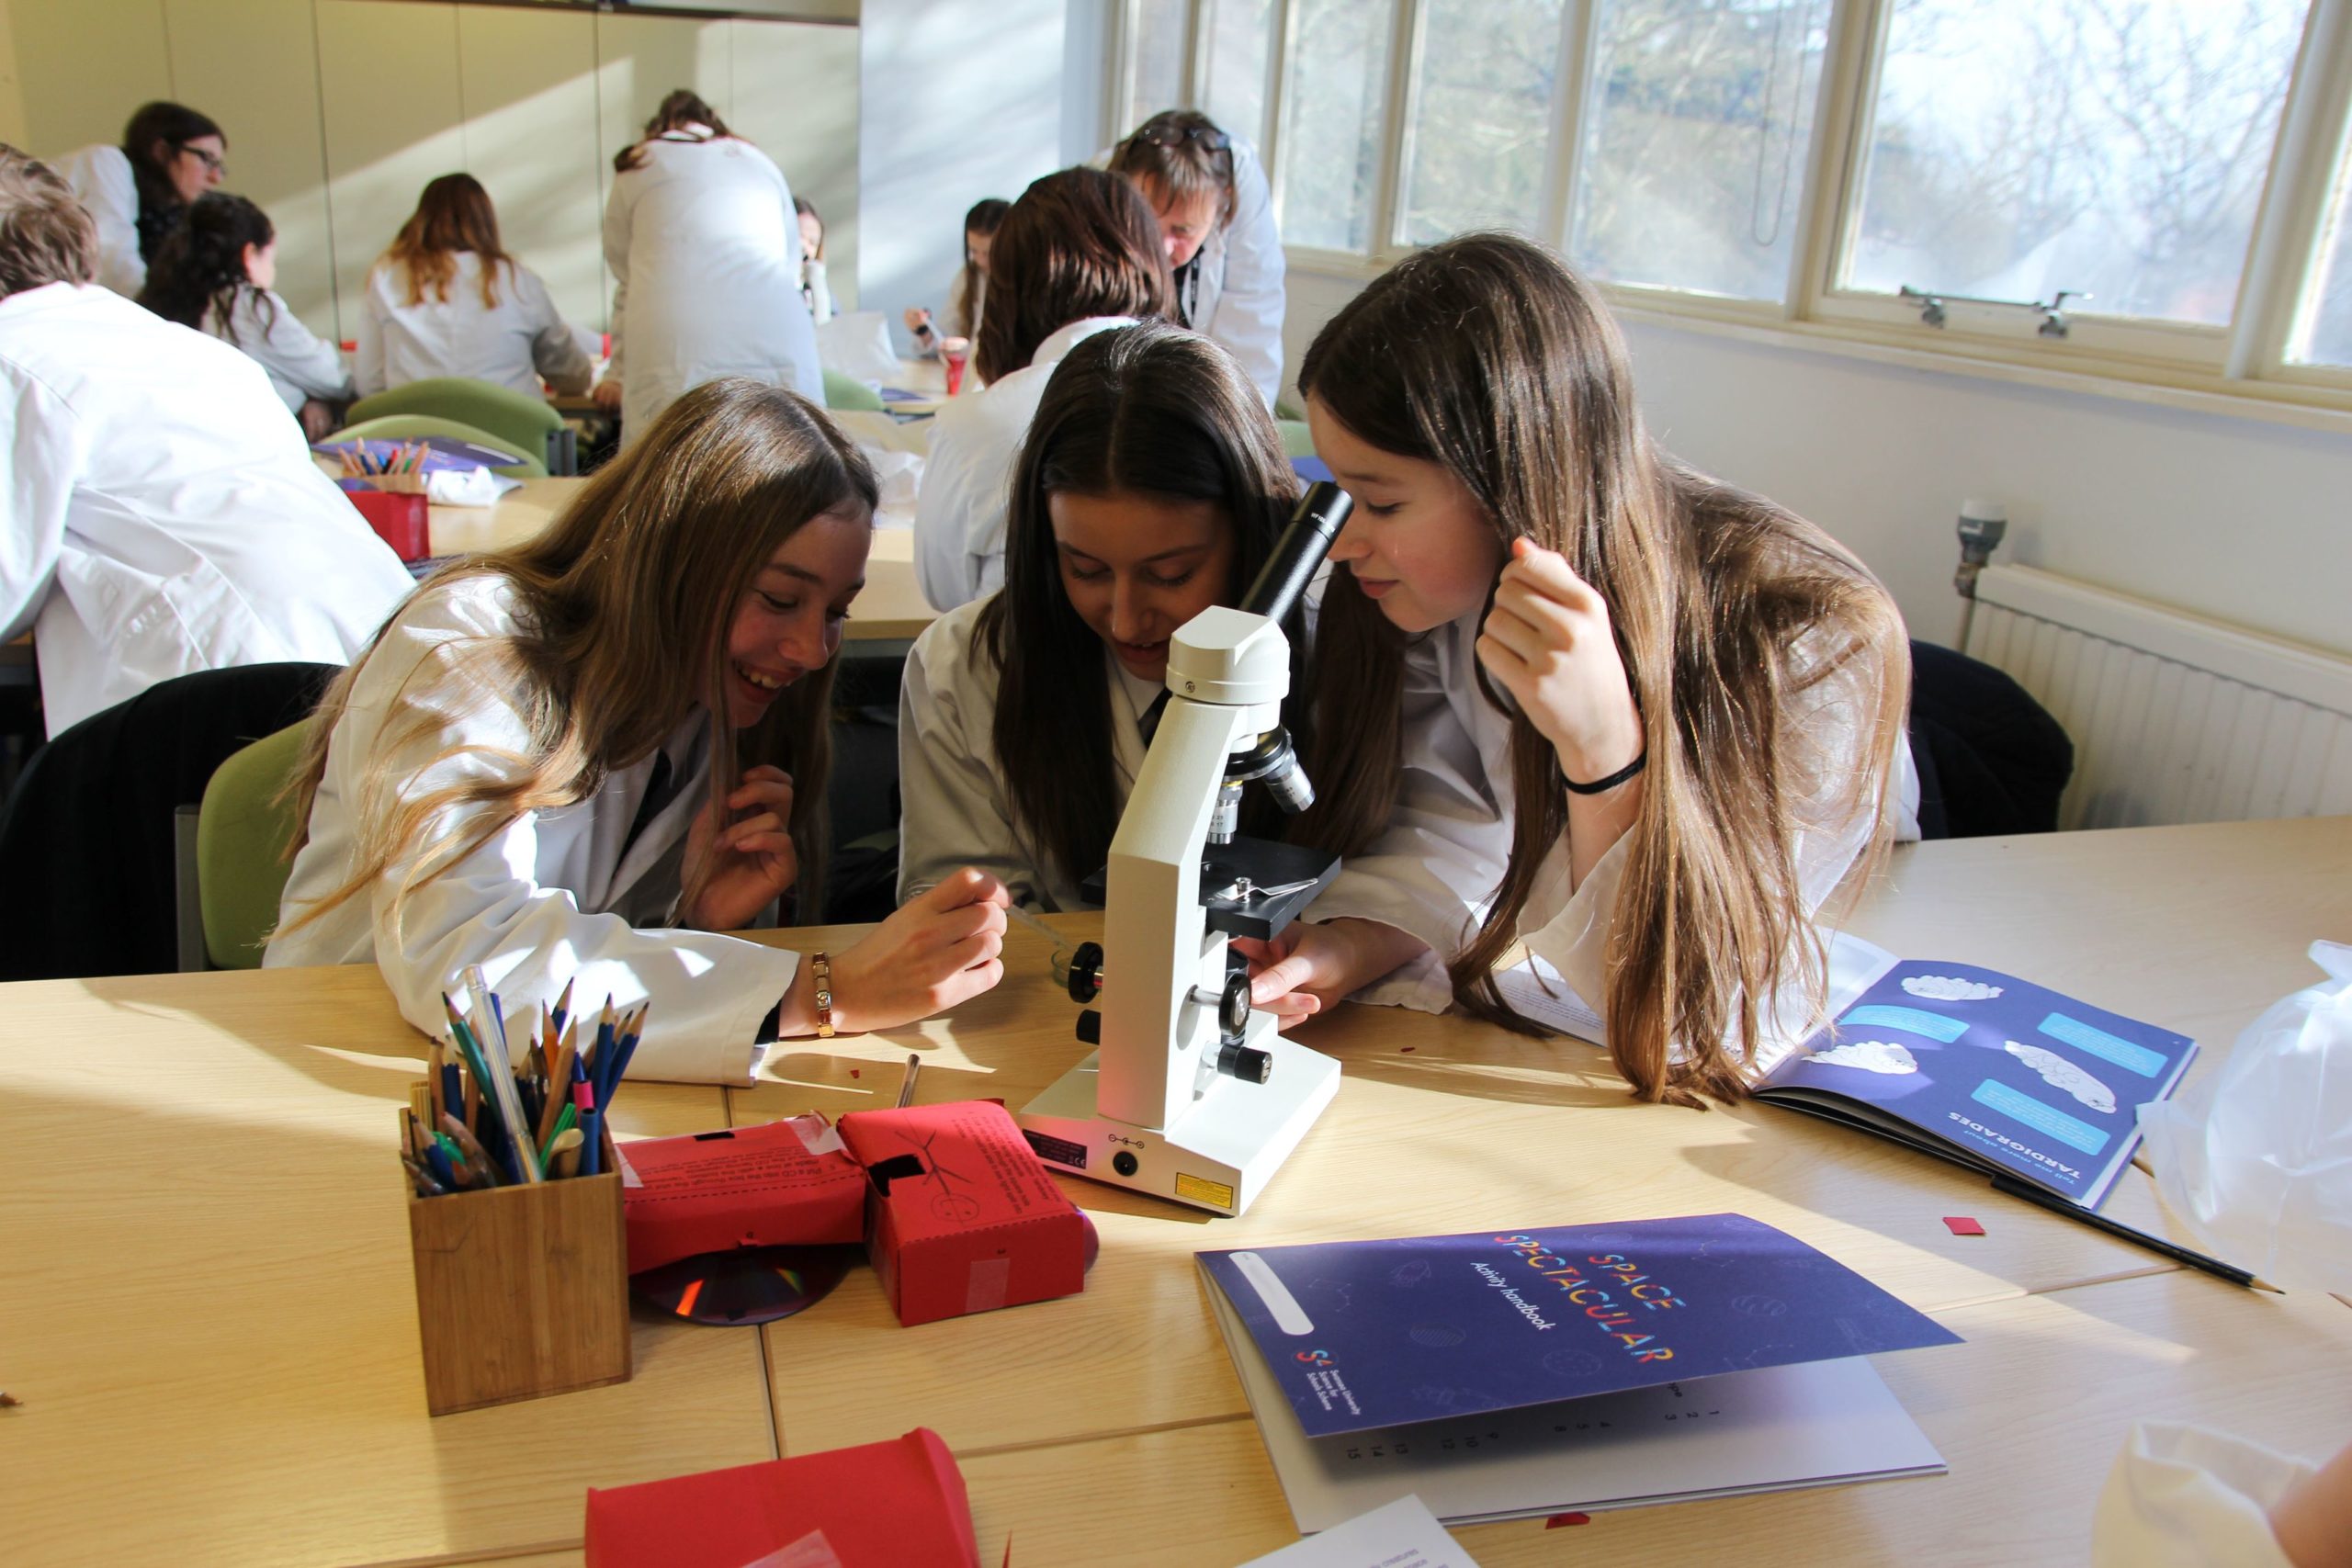 Swansea University Science for Schools Scheme Marks 10th Anniversary by sharing 150 Free Online STEM Enrichment Activities for Teachers and Learners